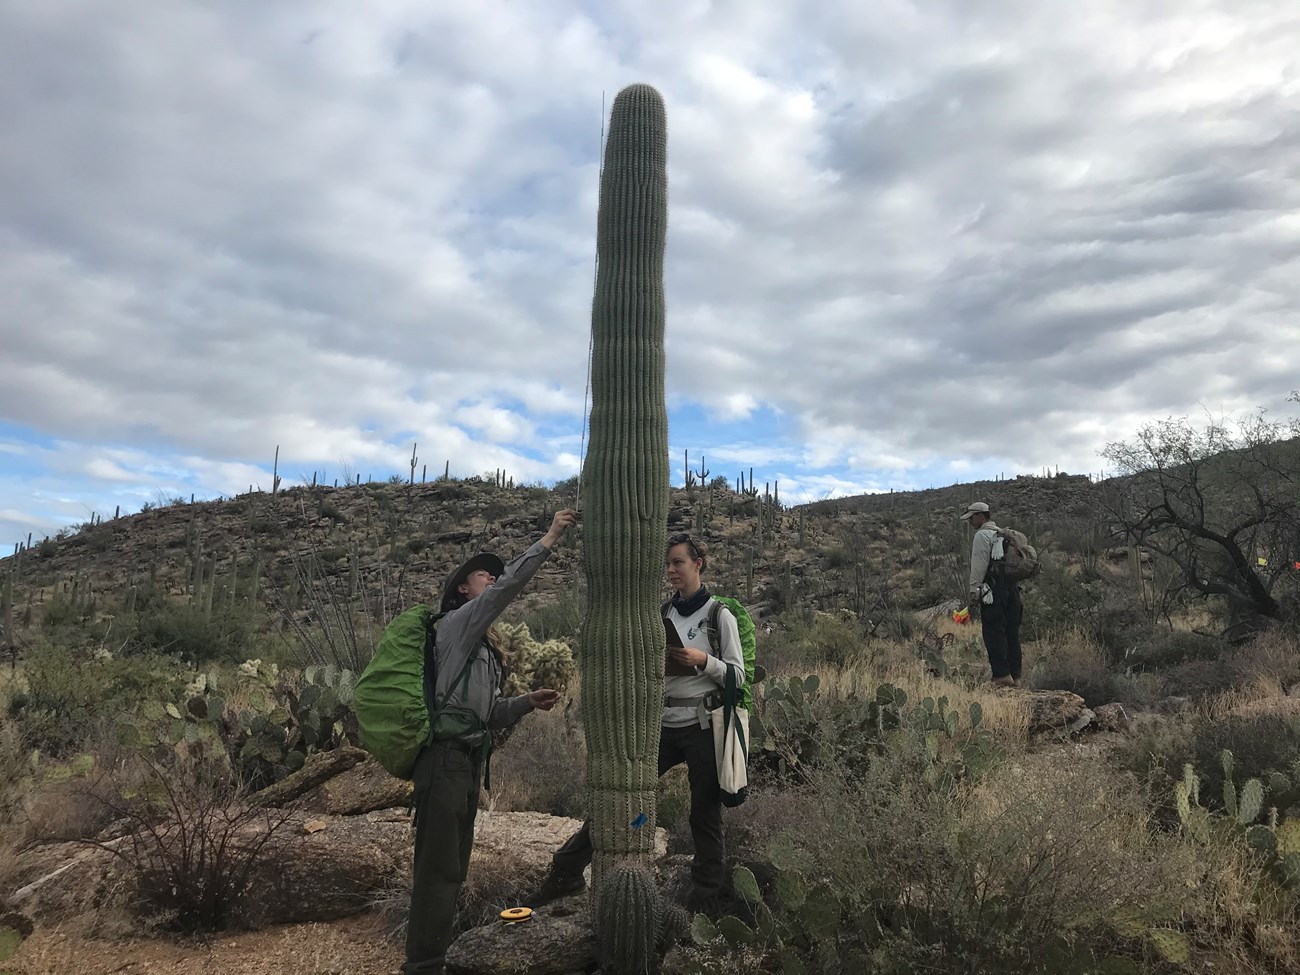 Two women measuring the height of a tall saguaro using a meter stick